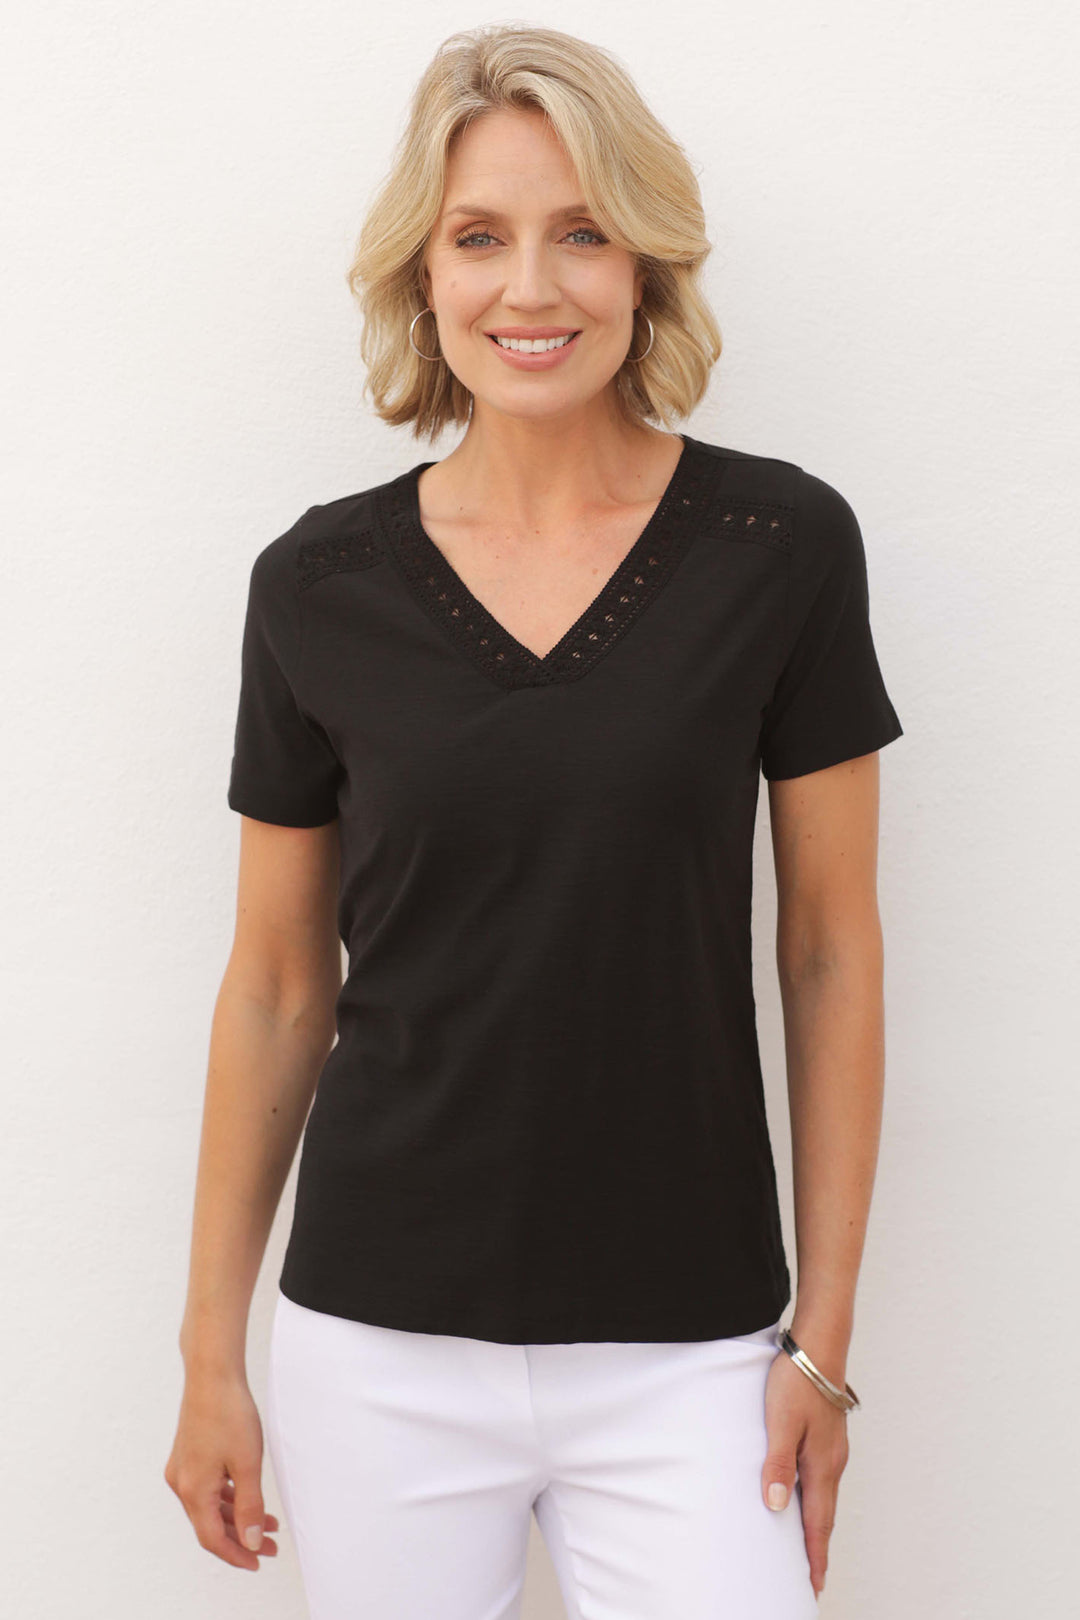 Pomodoro 82403 Black Lace Insert T -Shirt - Rouge Boutique Inverness